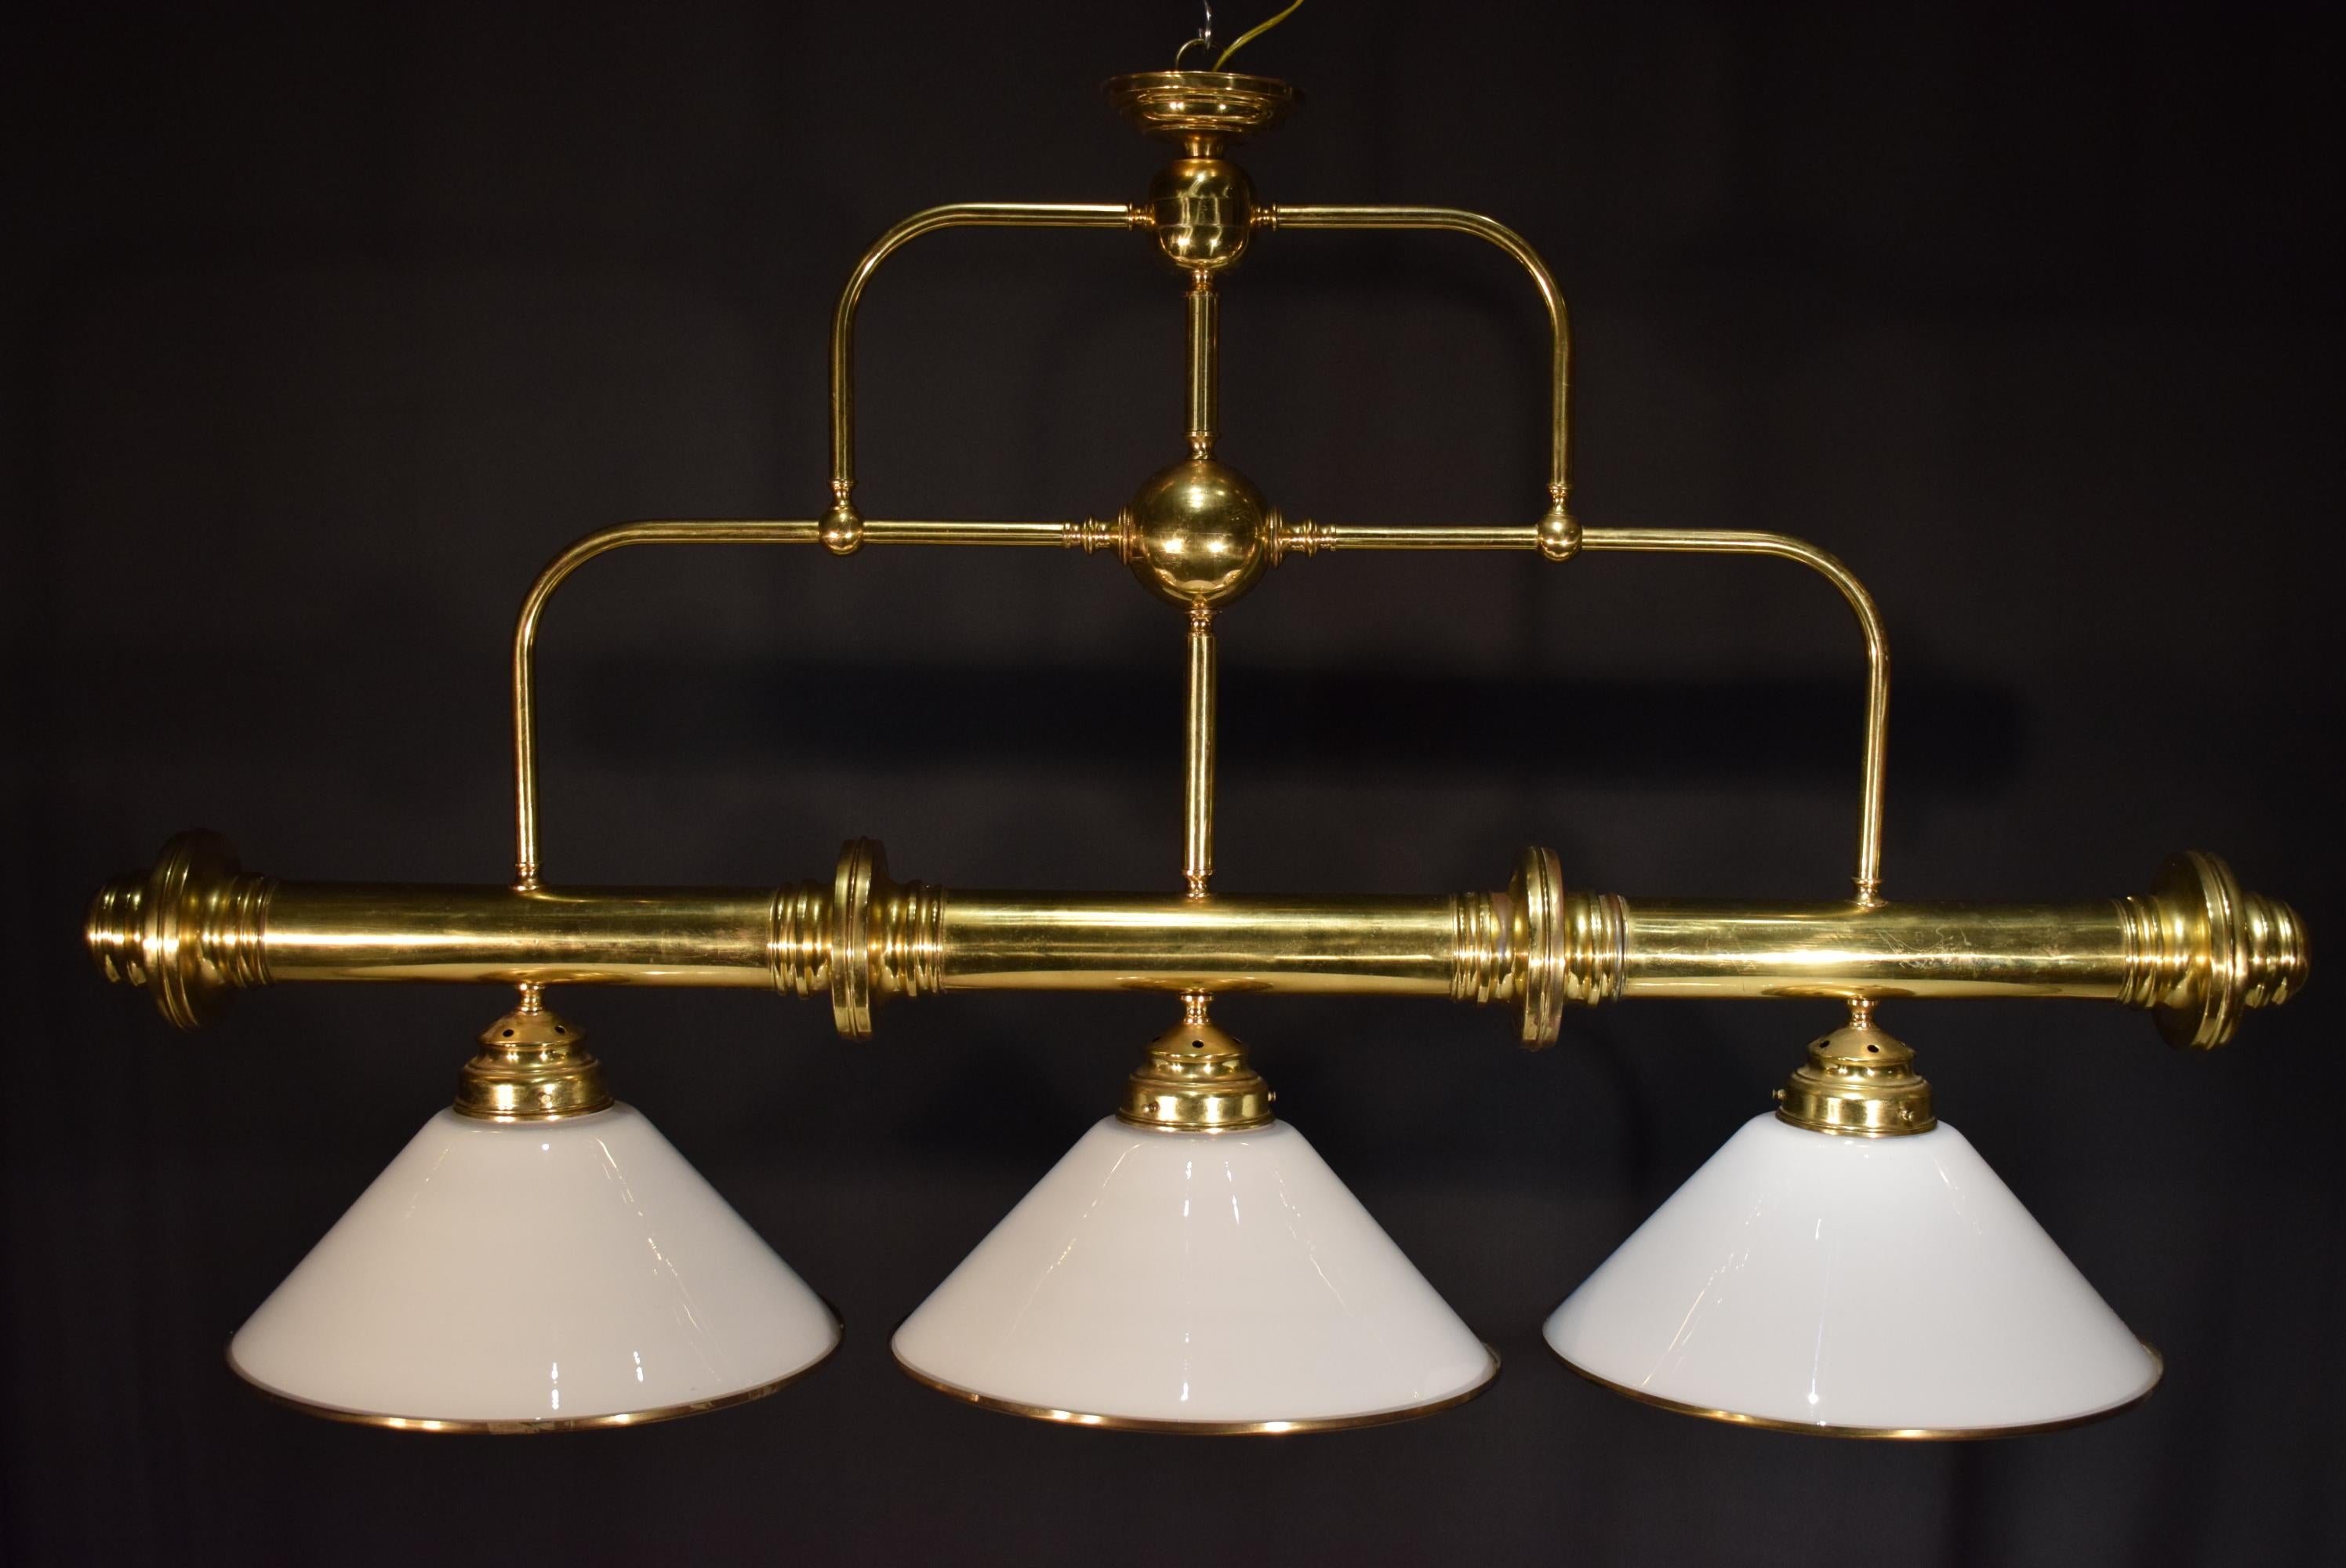 A very fine brass billiard or over kitchen island chandelier. Featuring 3 white glass conical shades fitted with brass rim. England, circa 1930.
Dimensions: Height 36 1/2